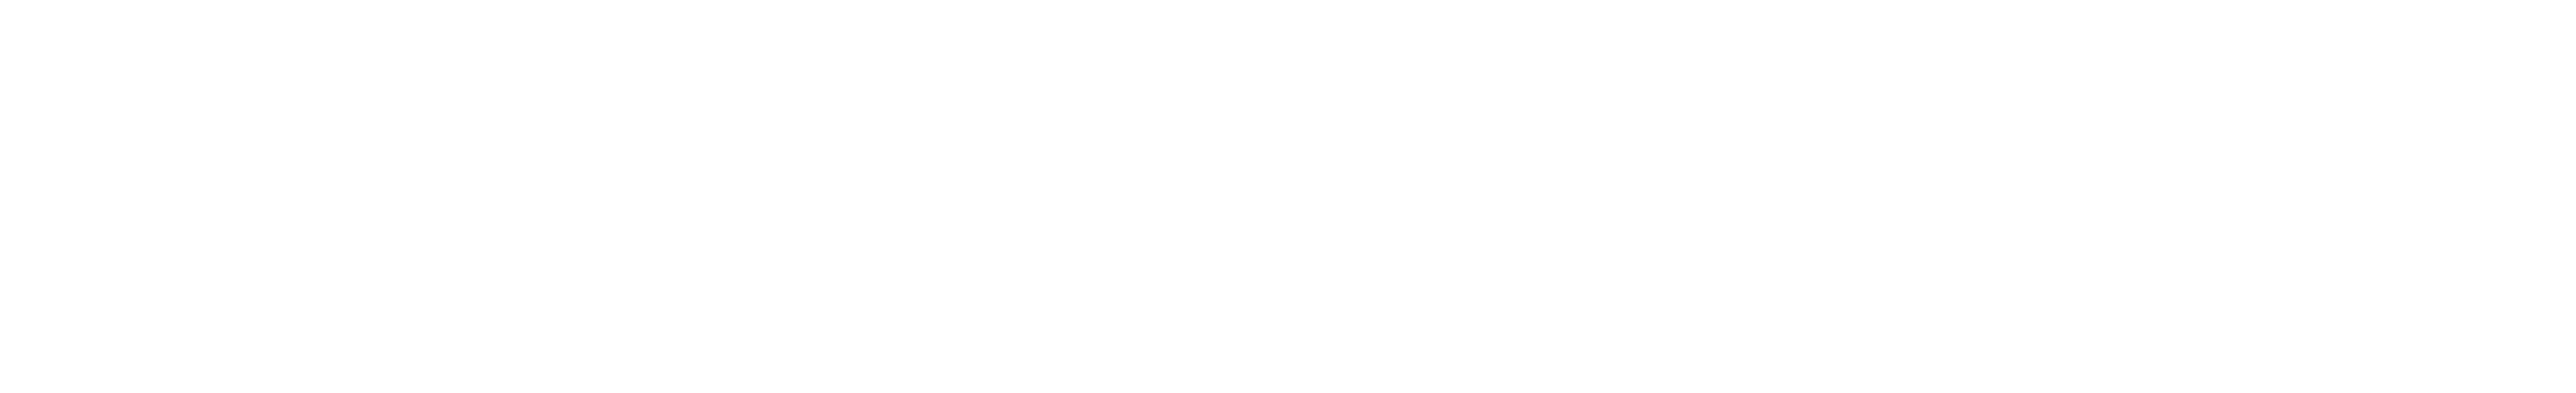 The House Fund logo in white